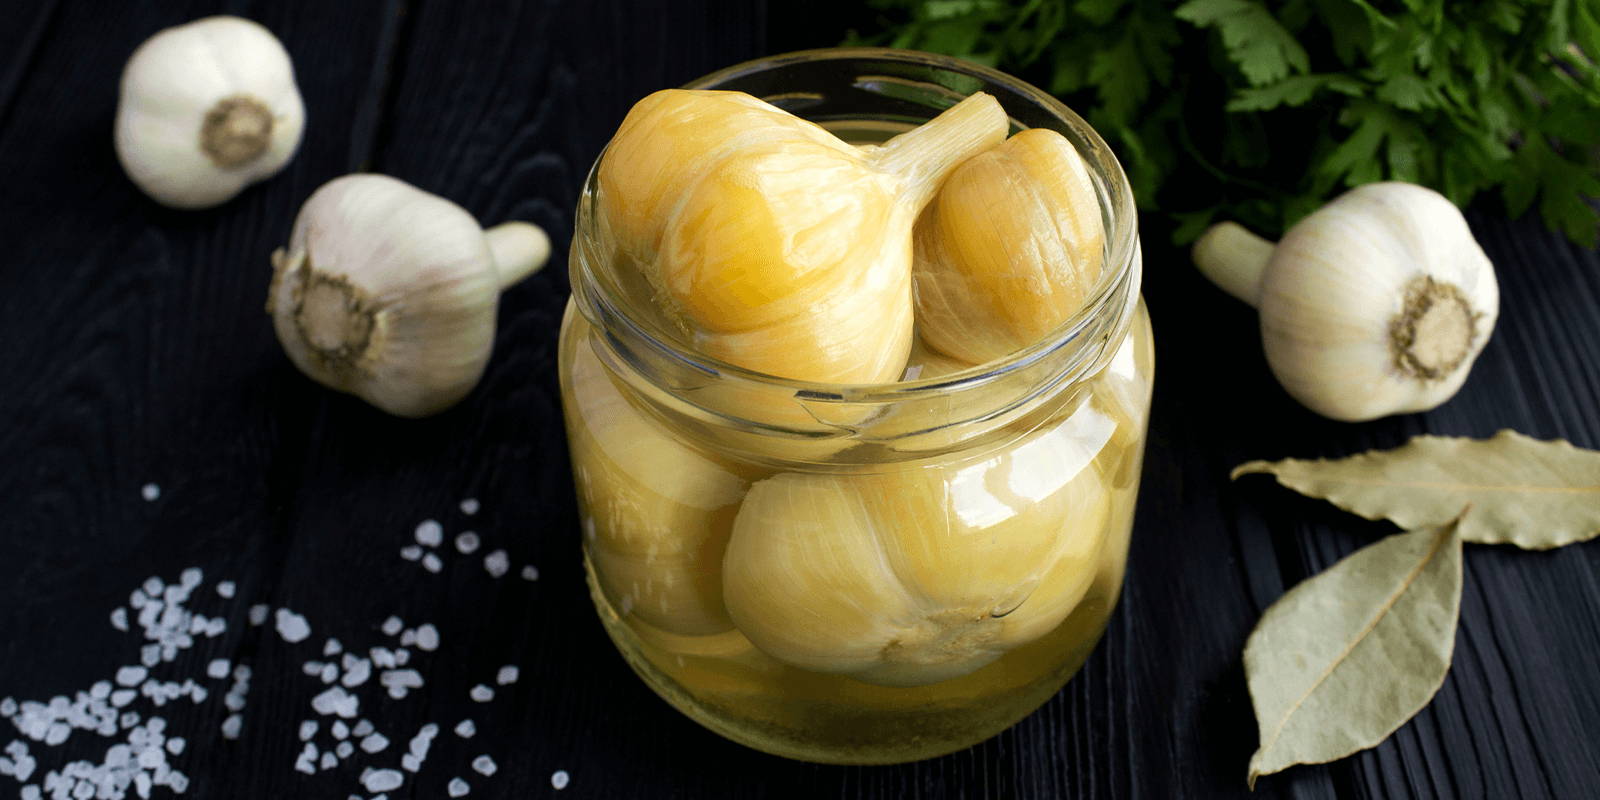 Roasted garlic in a jar filled with oil.